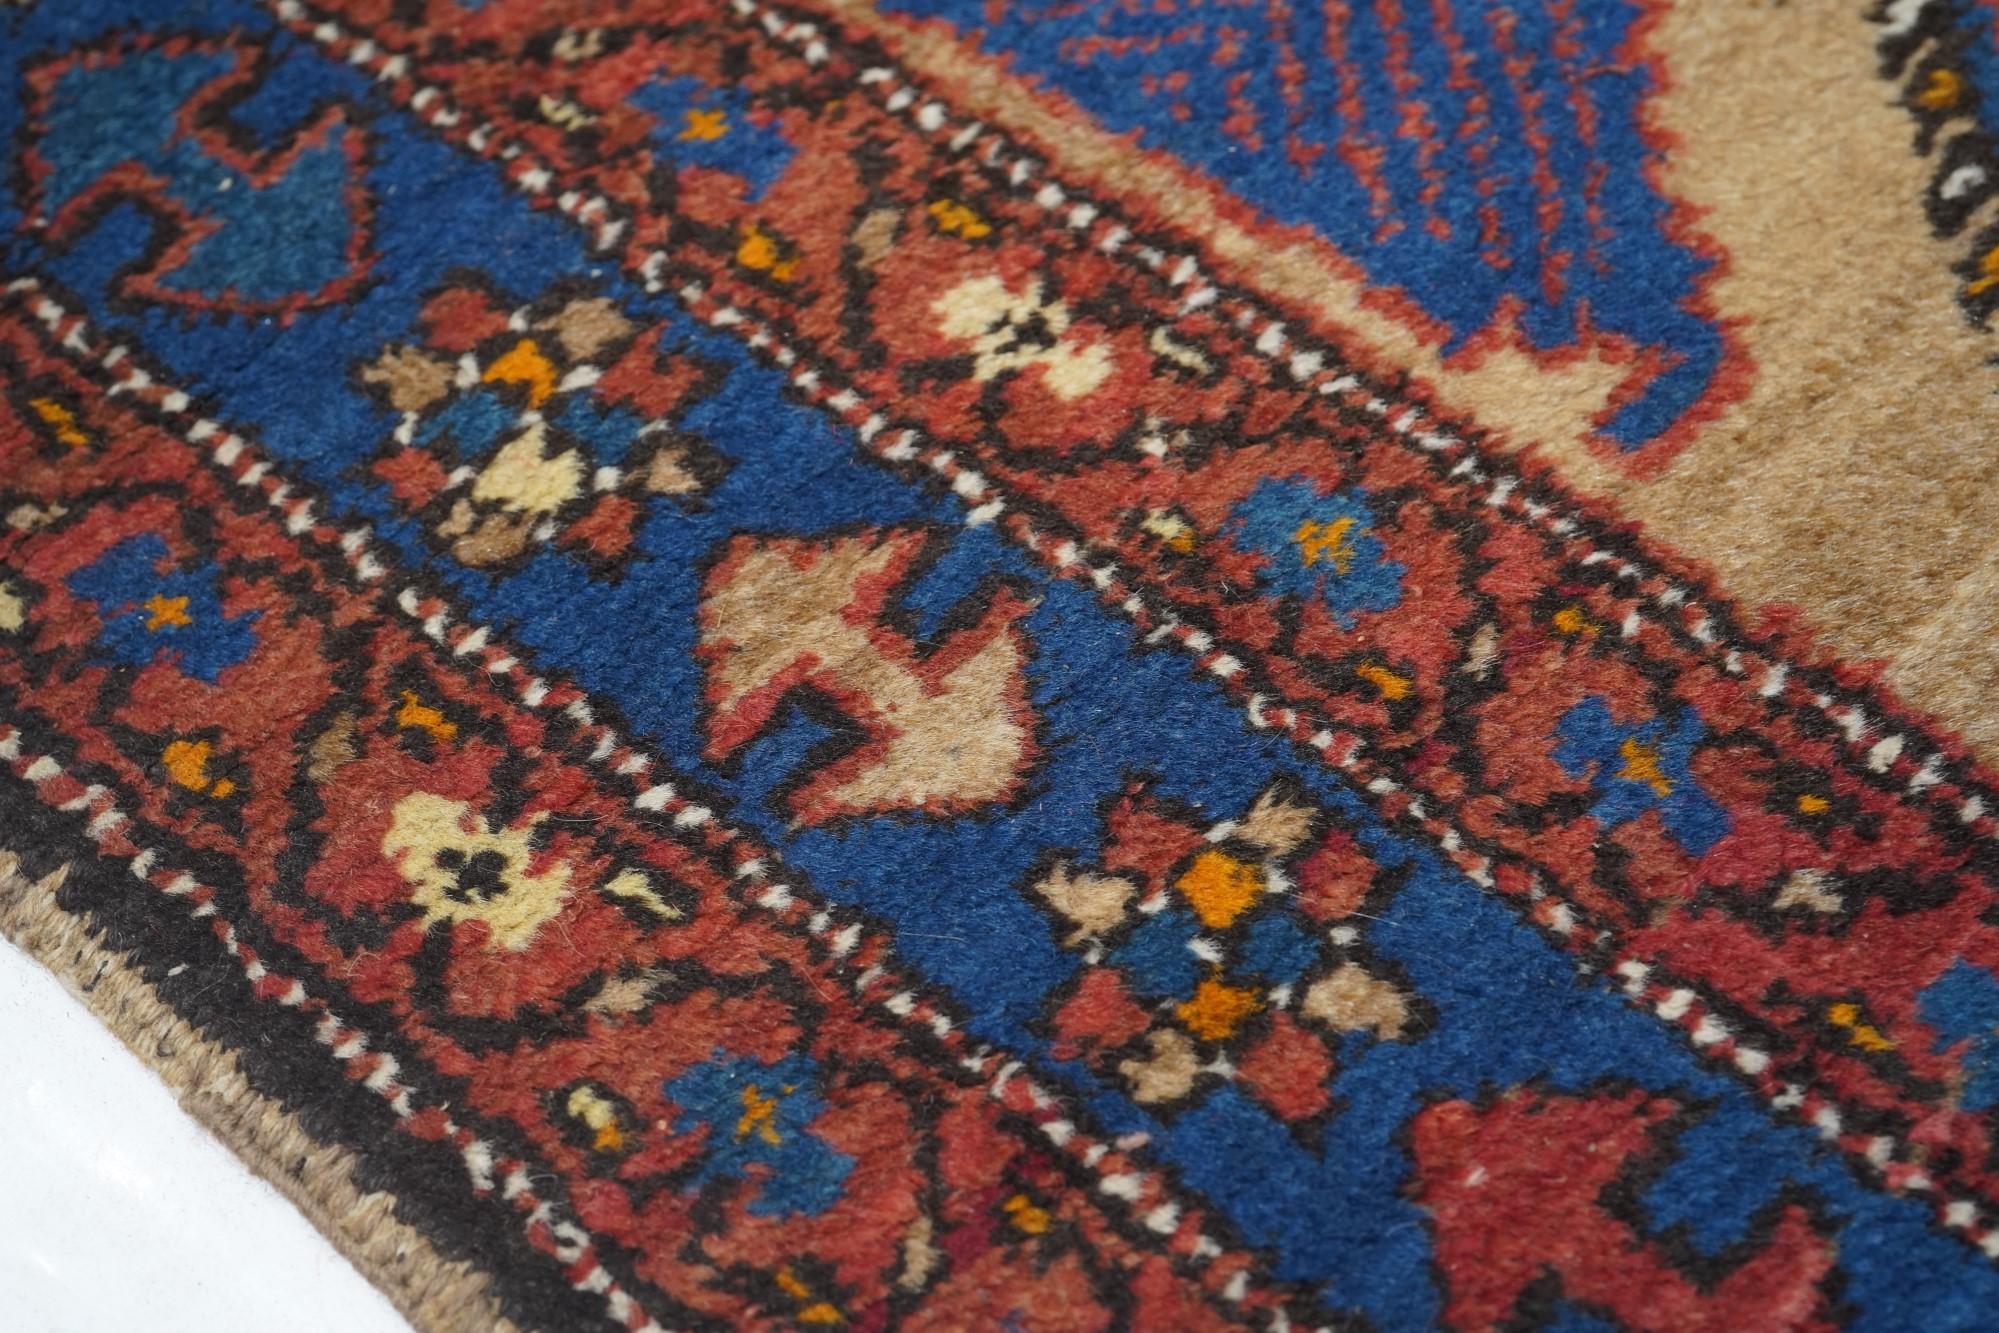 Antique Bakhshaish Rug In Excellent Condition For Sale In New York, NY